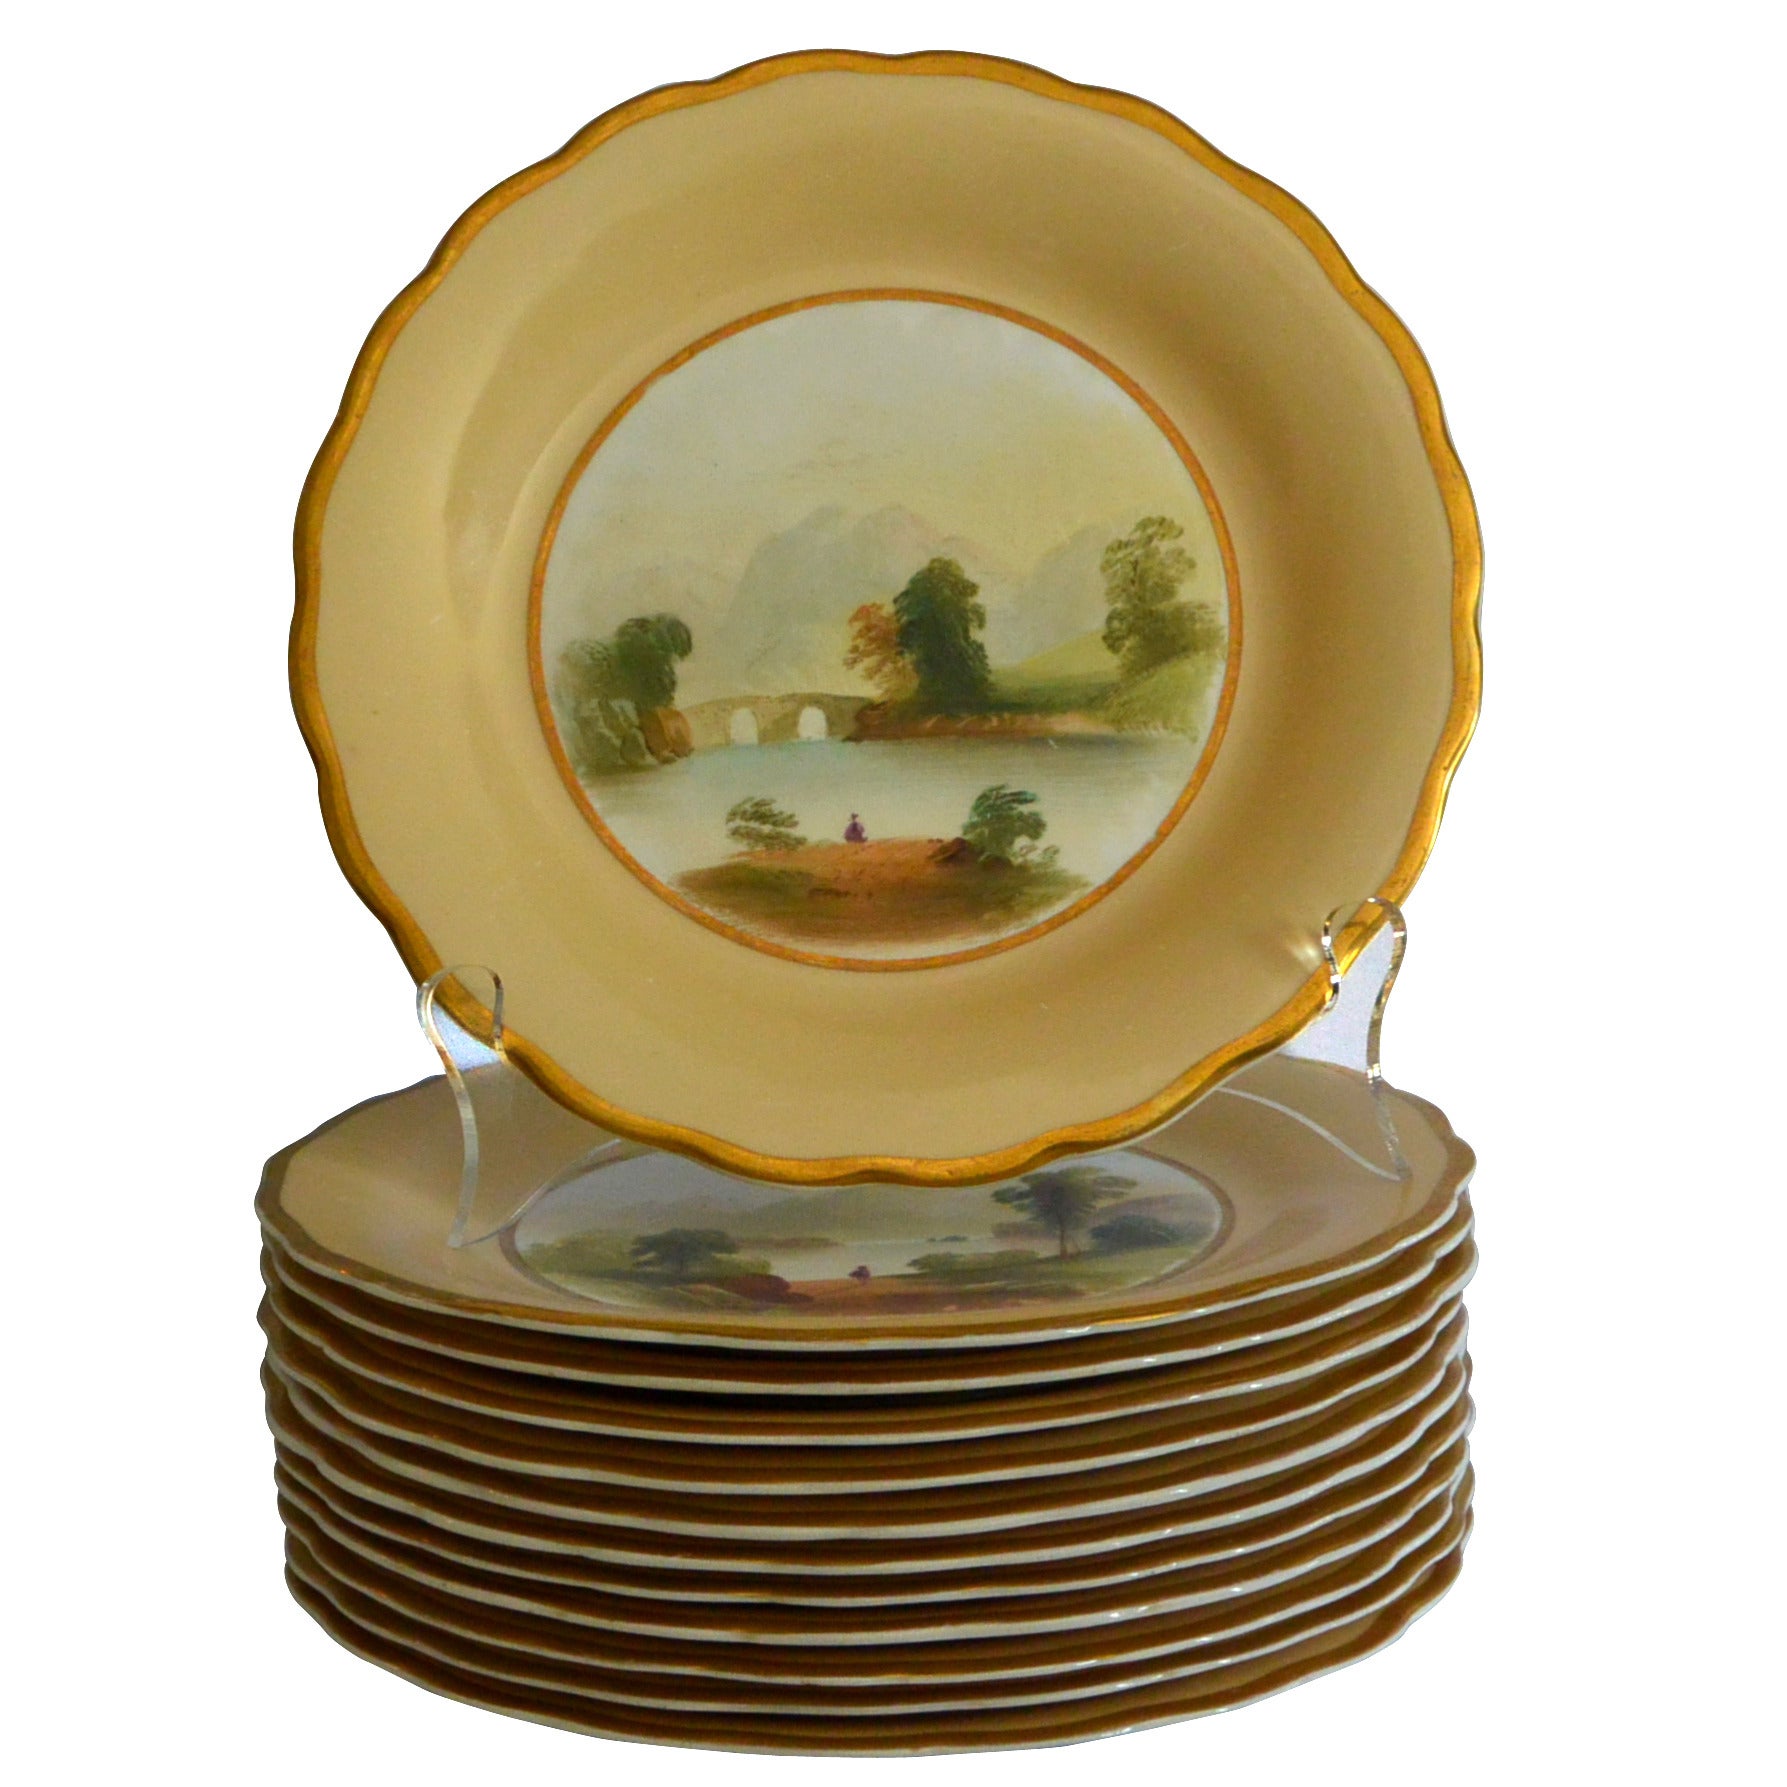 Set of 12 Gilt-Rimmed Dessert Plates and Cake Stand with Scottish Scenes